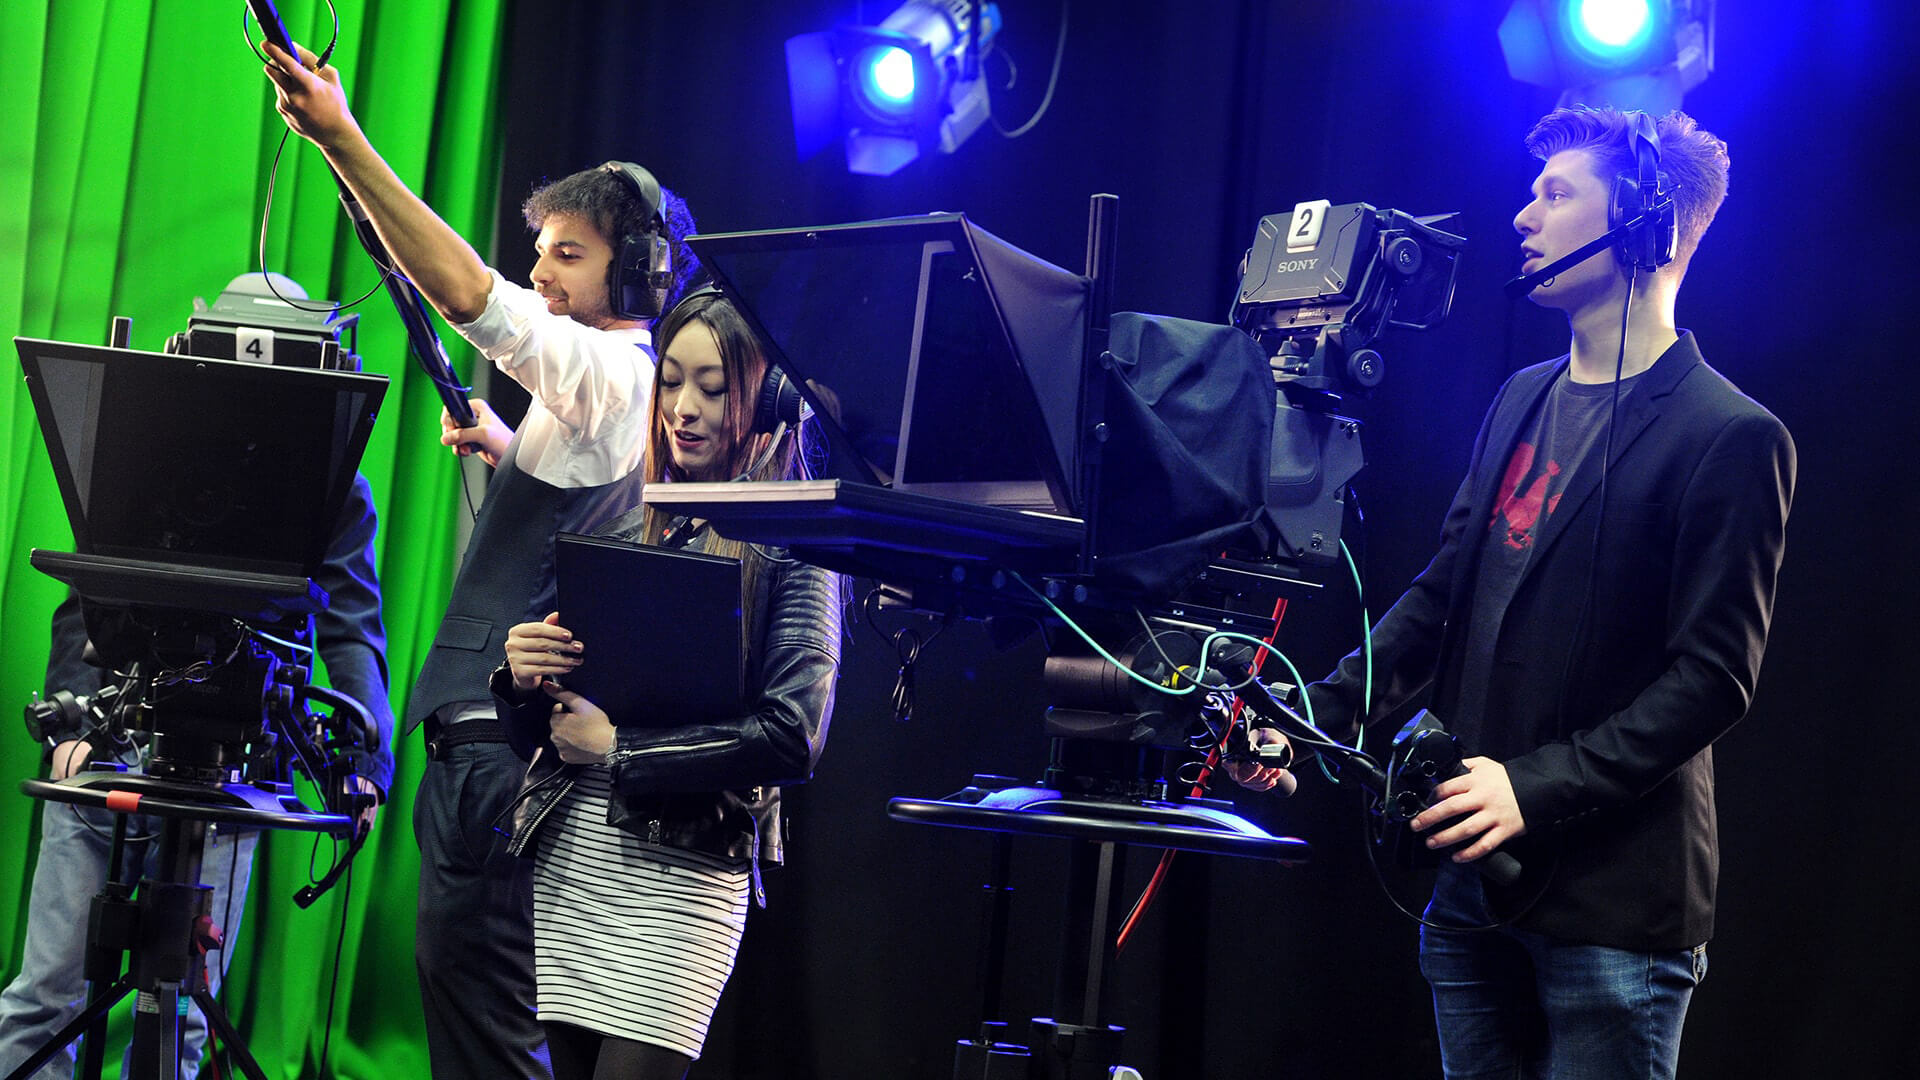 Four students film in the broadcast studio, some operating equipment and another holding a folder and supervising the exercise.